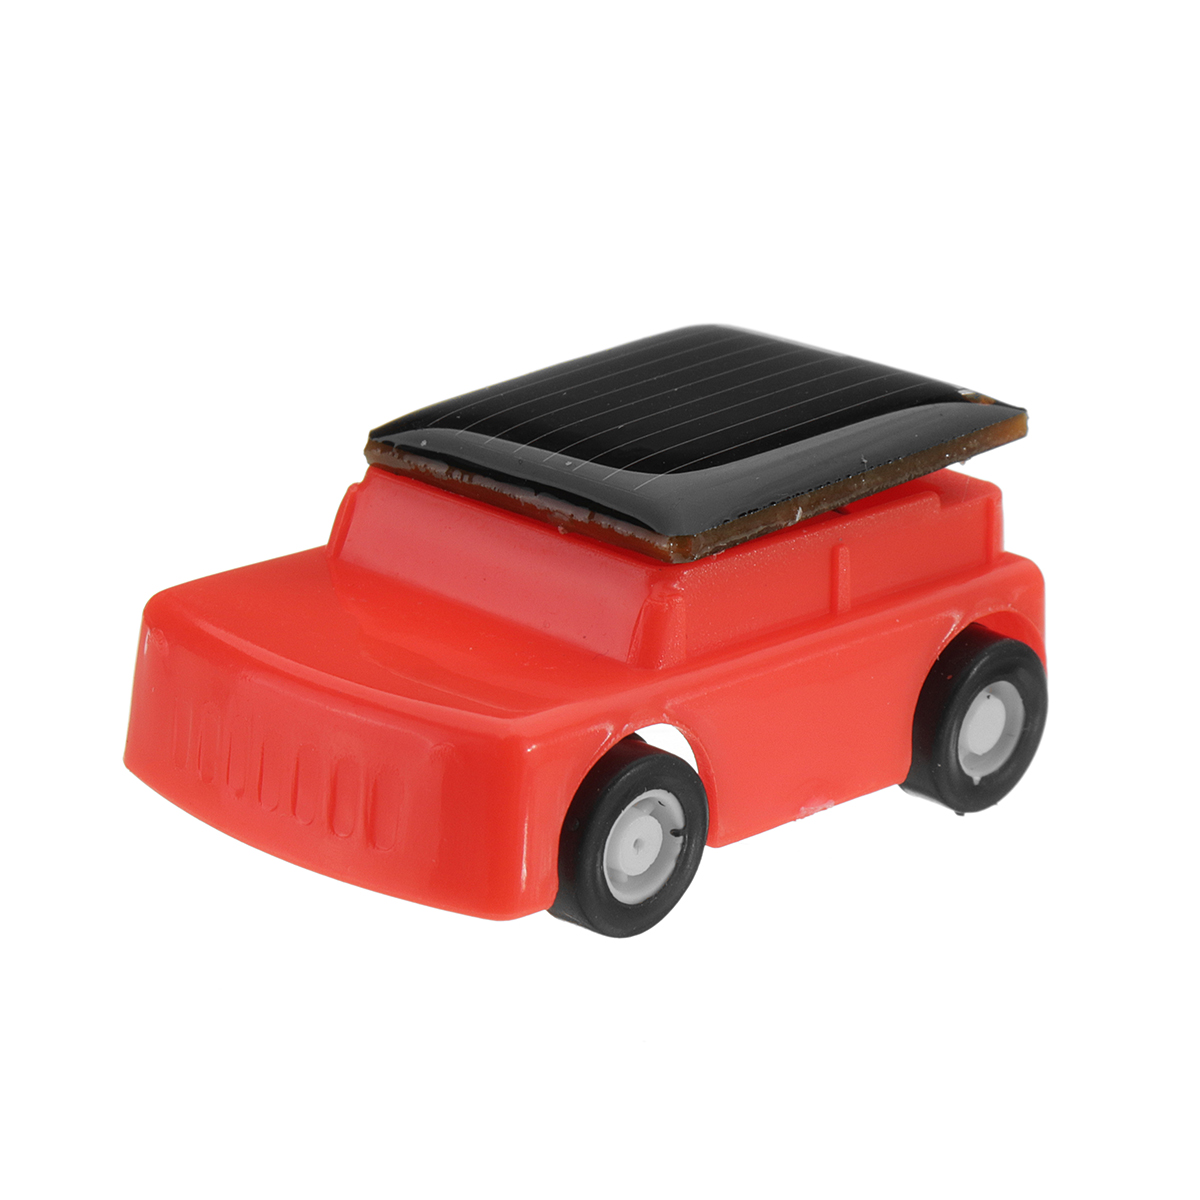 Solar-Powered-Toy-Mini-Car-Kids-Gift-Super-Cute-Creative-ABS-No-toxic-Material-Children-Favorate-1315990-5